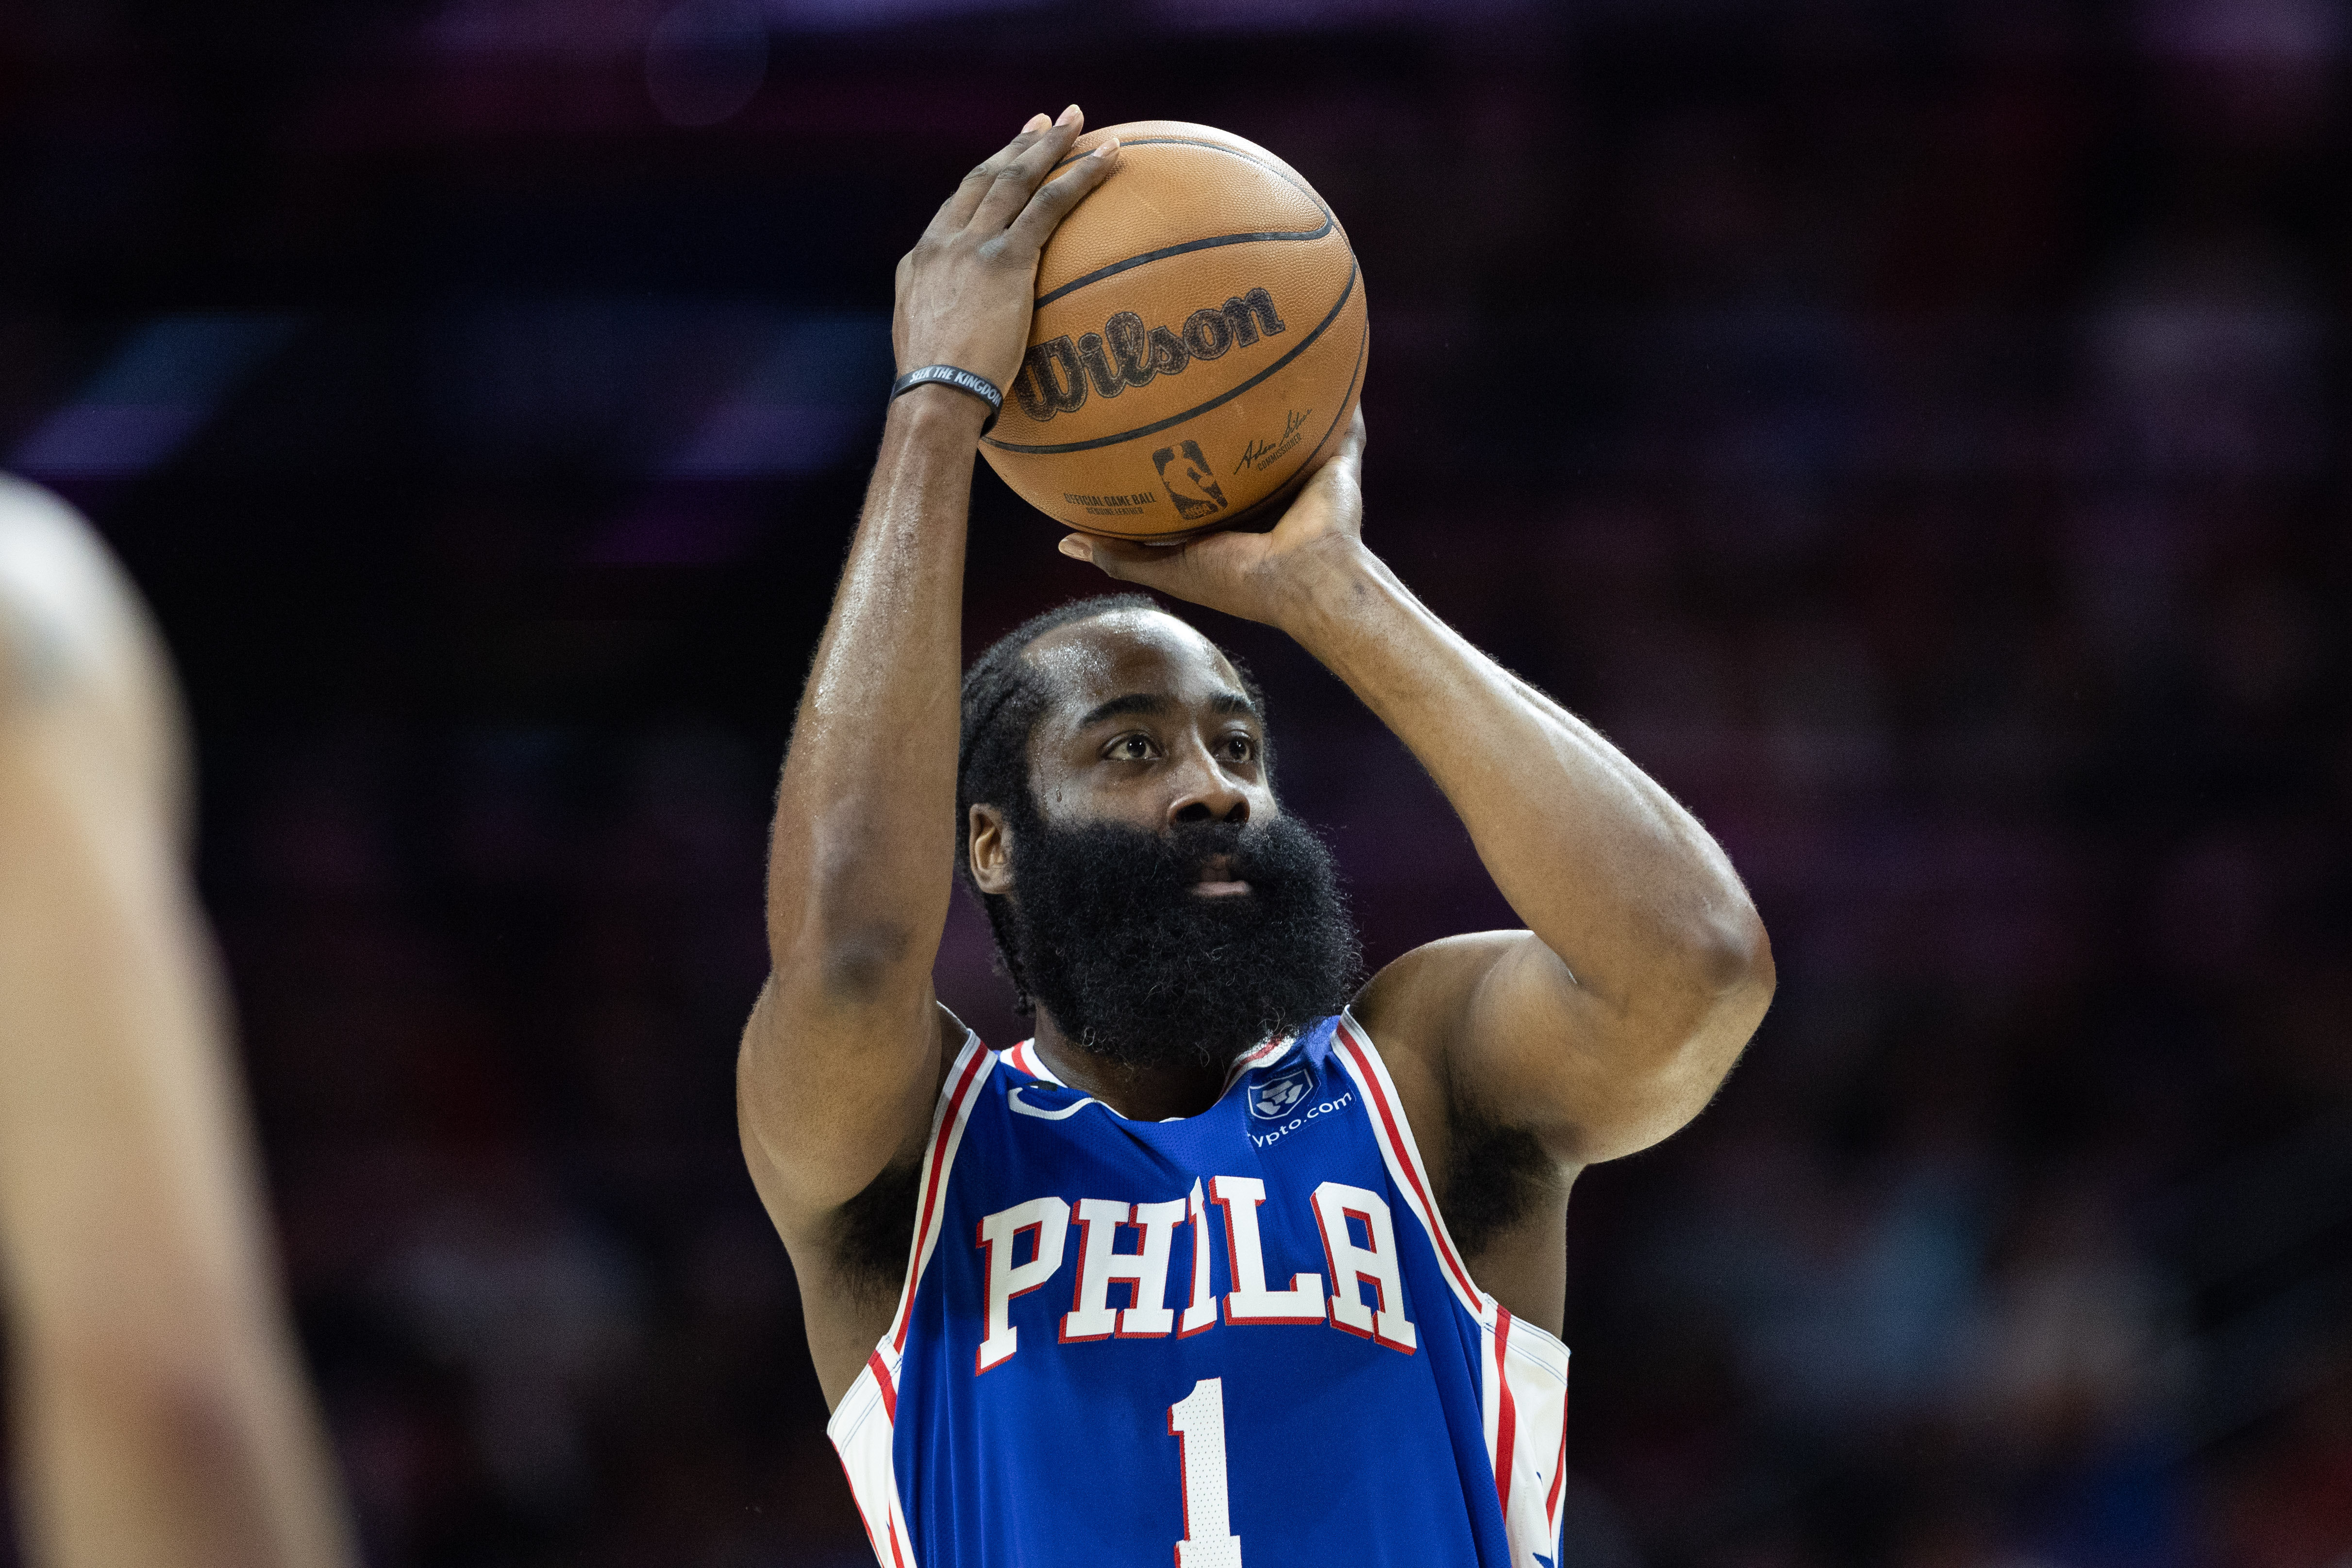 NBA Rumors: James Harden 'Determined' To Join This Team